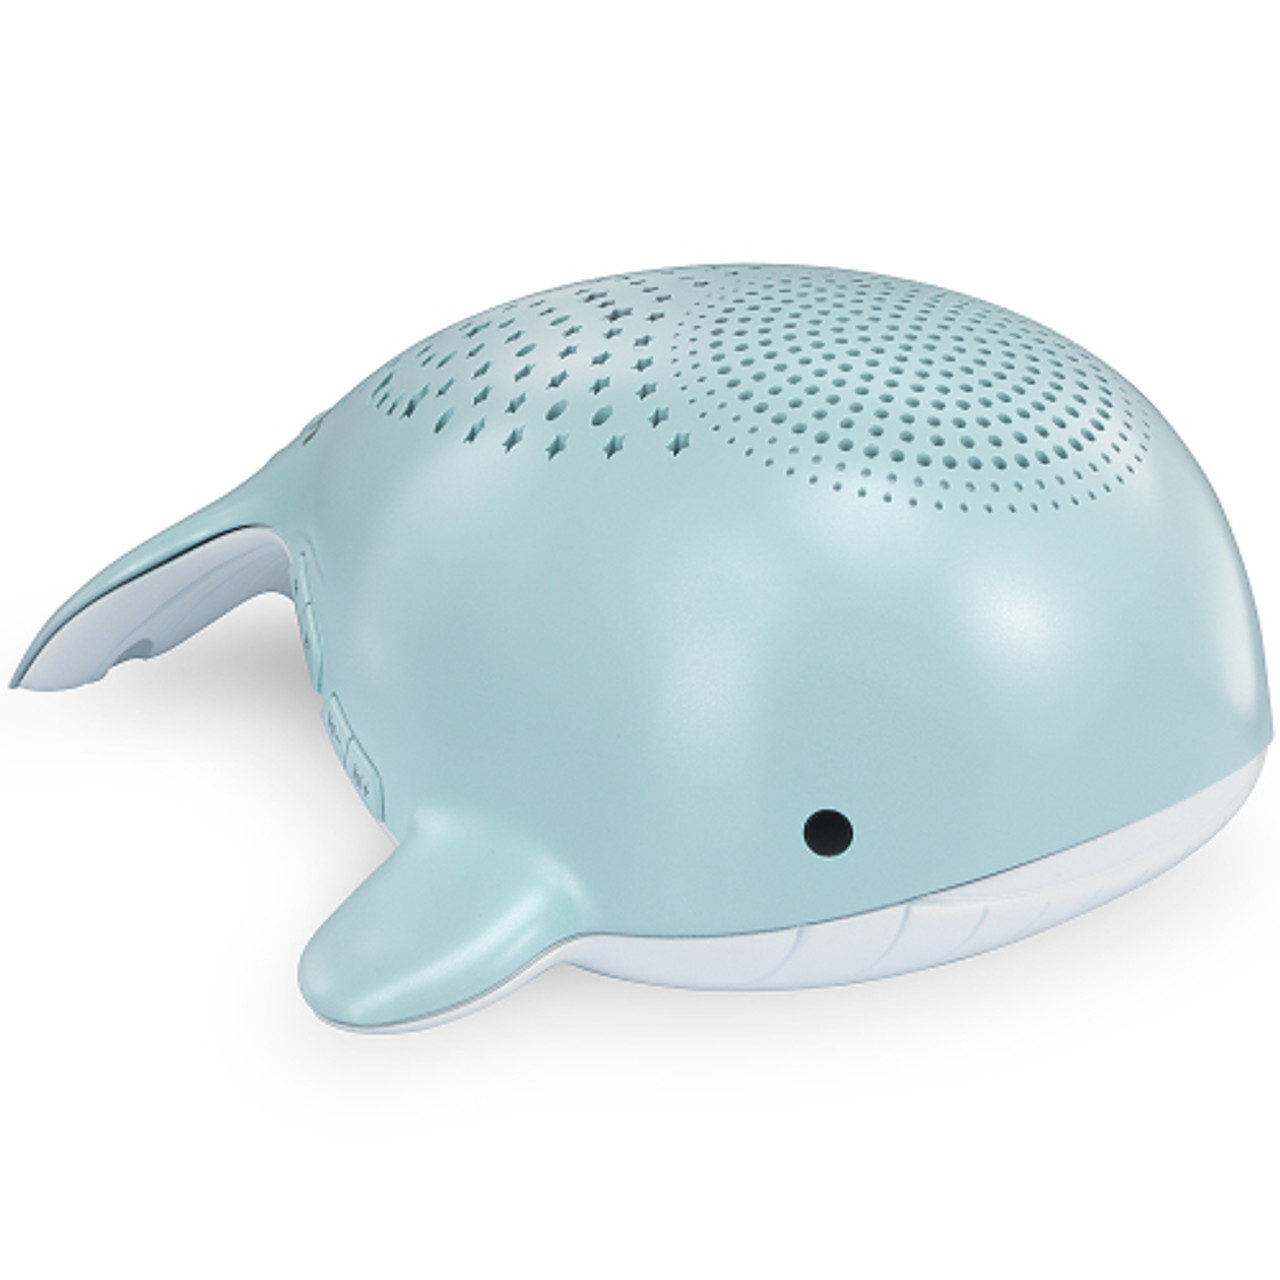 VTech - Wyatt the Whale Storytelling Soother - Blue/White